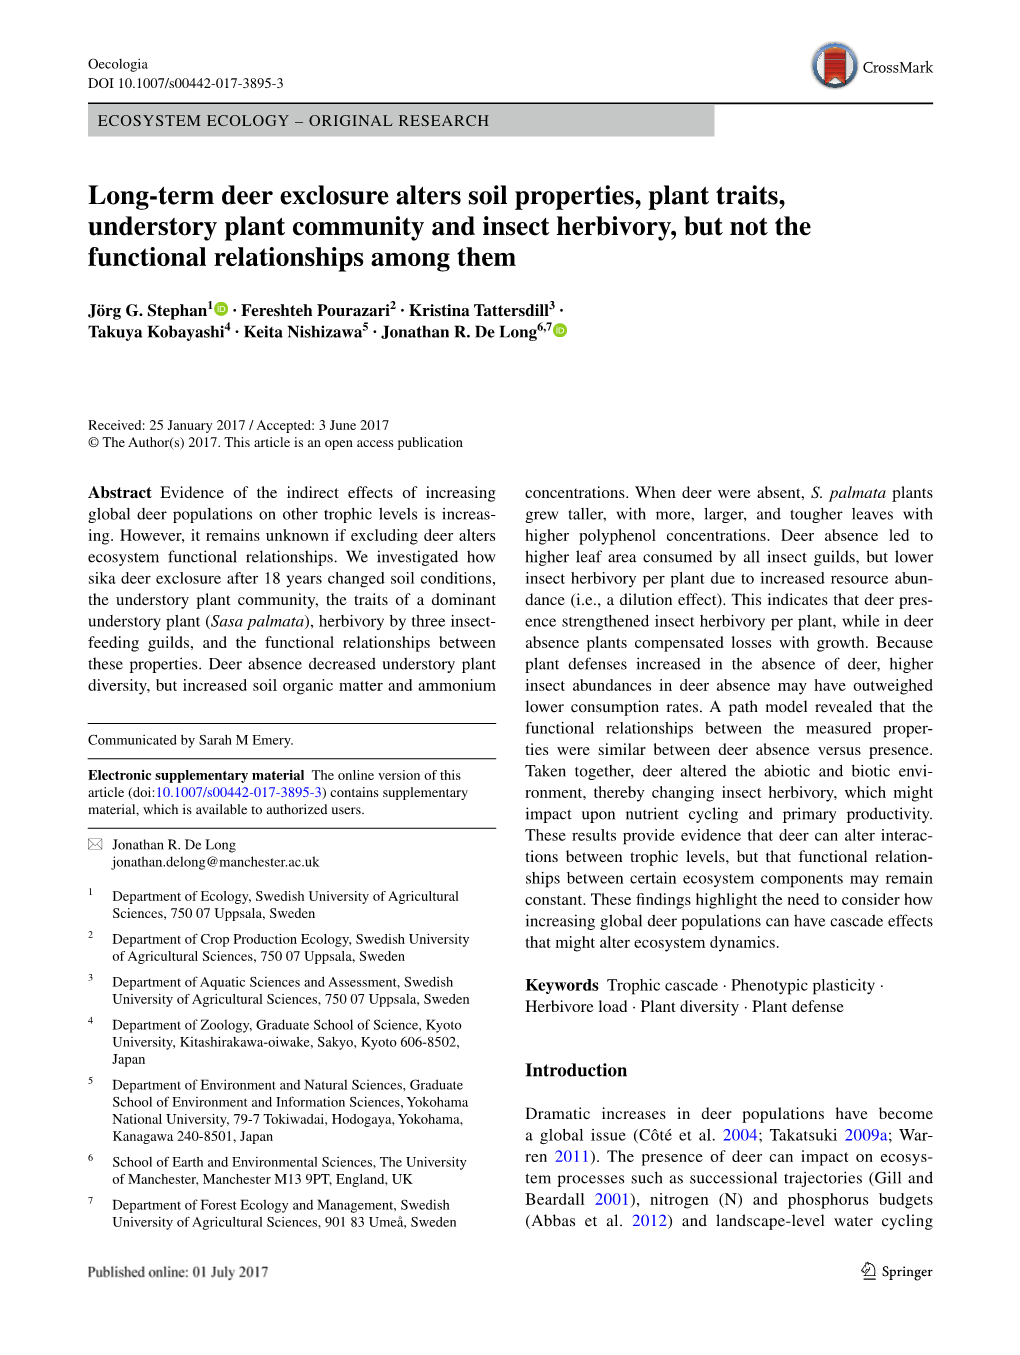 Long-Term Deer Exclosure Alters Soil Properties, Plant Traits, Understory Plant Community and Insect Herbivory, but Not the Functional Relationships Among Them